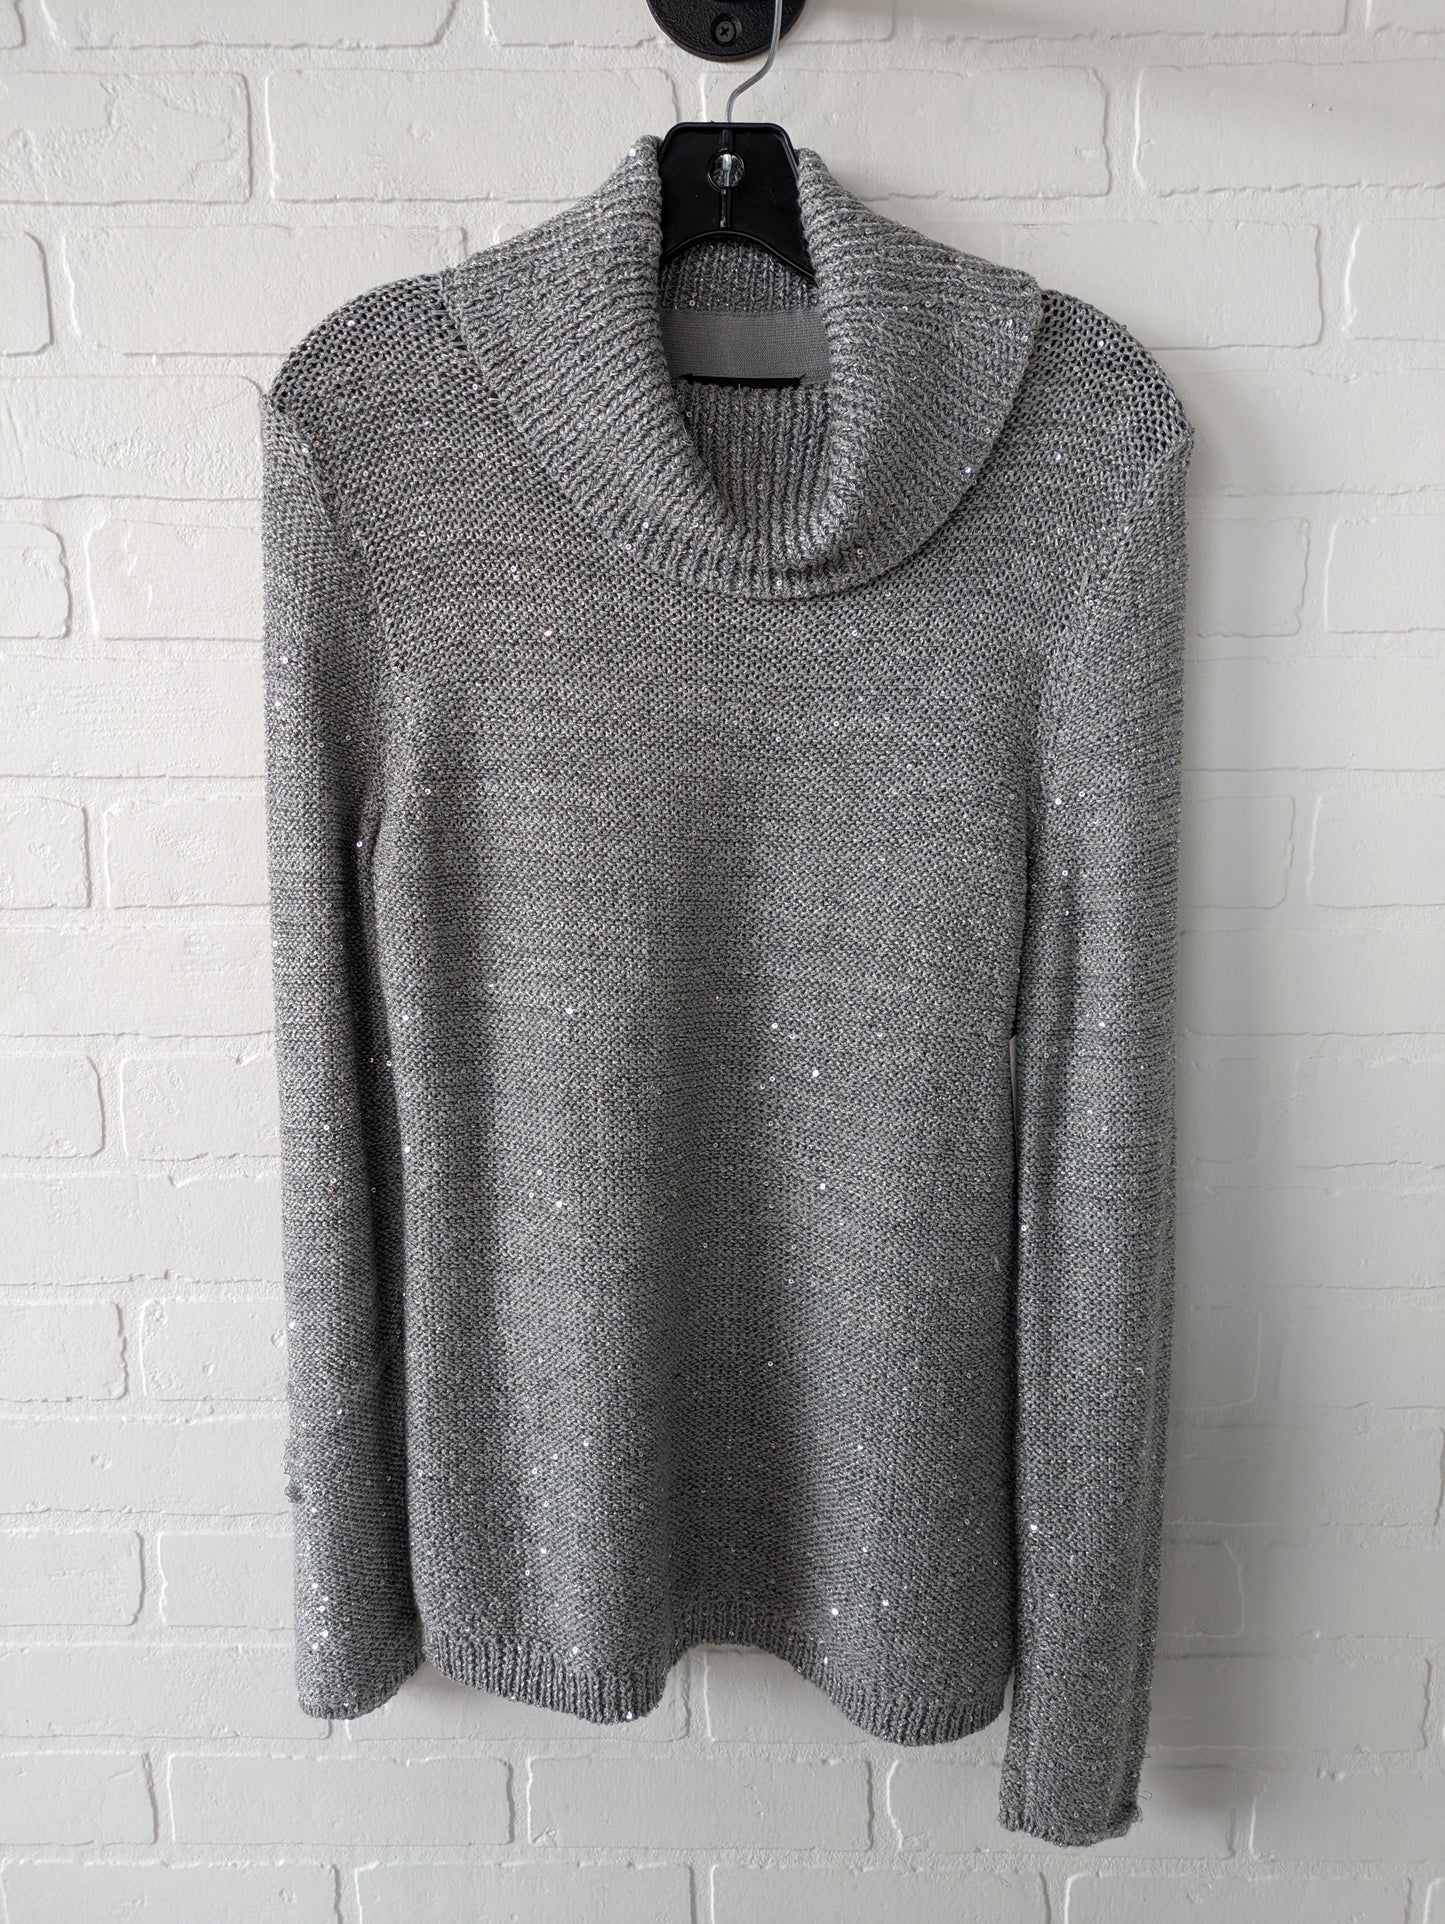 Sweater By White House Black Market  Size: S